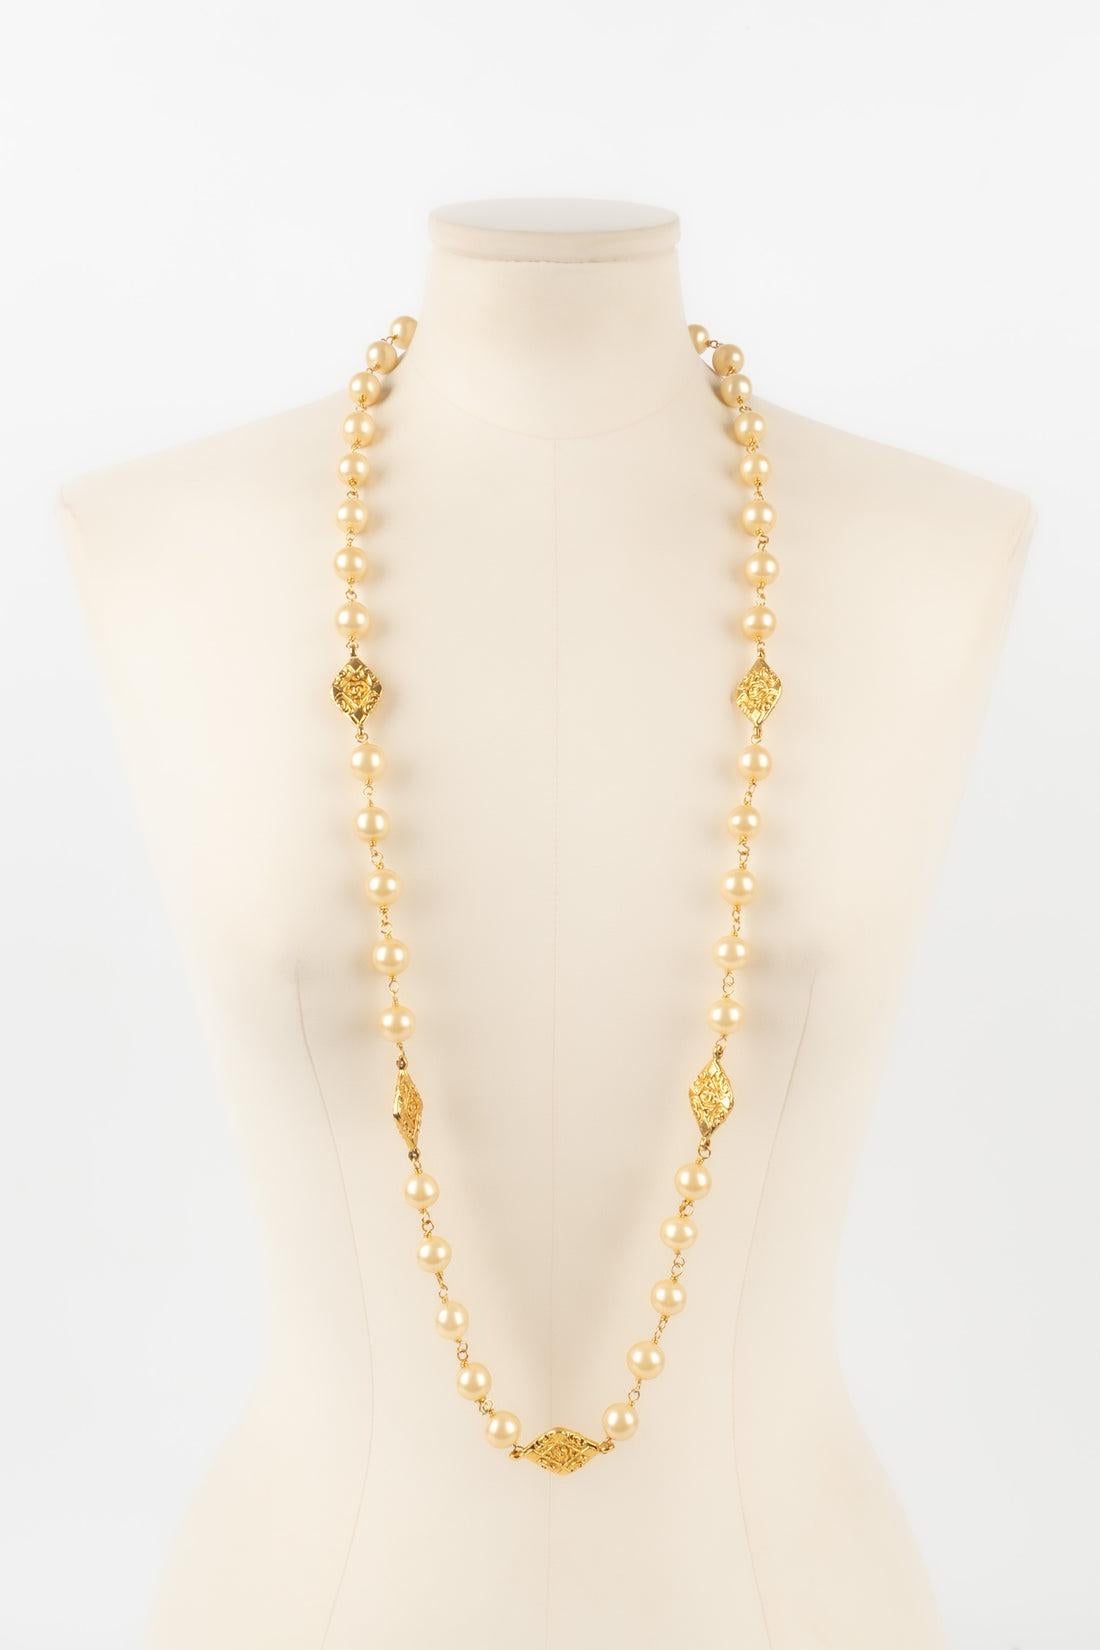 Chanel - (Made in France) Golden metal necklace with costume pearls.

Additional information:
Condition: Very good condition
Dimensions: Length: 105 cm

Seller Reference: CB157